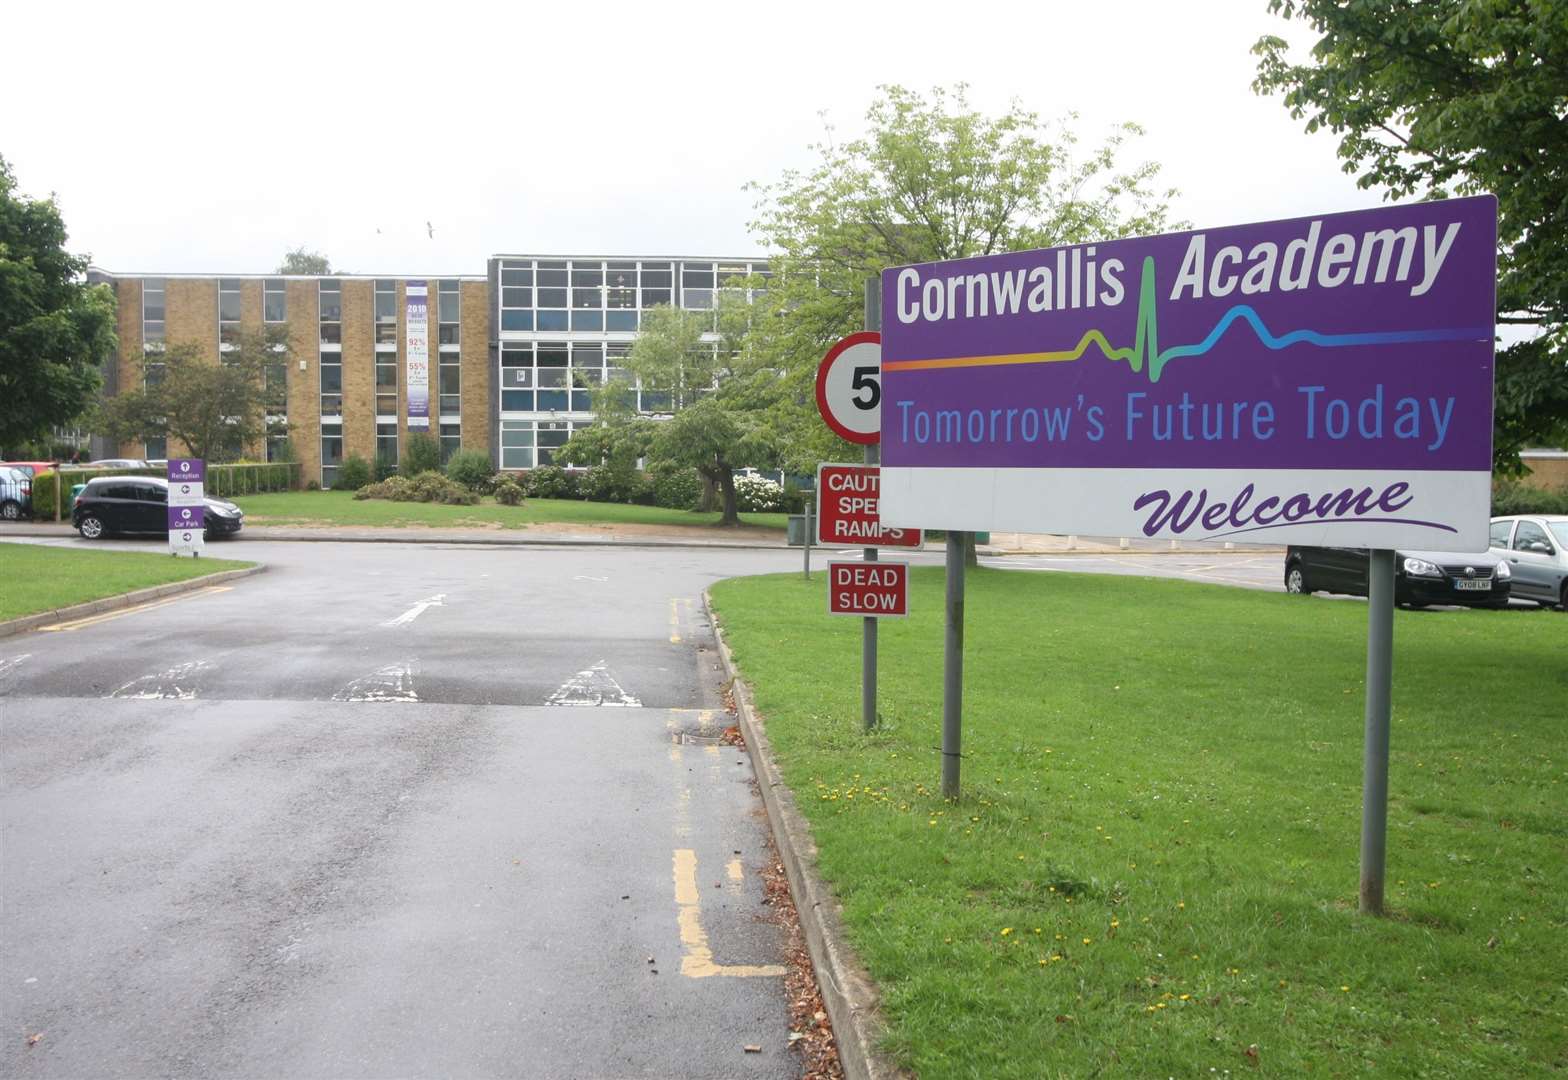 Cornwallis Academy had its licence approved